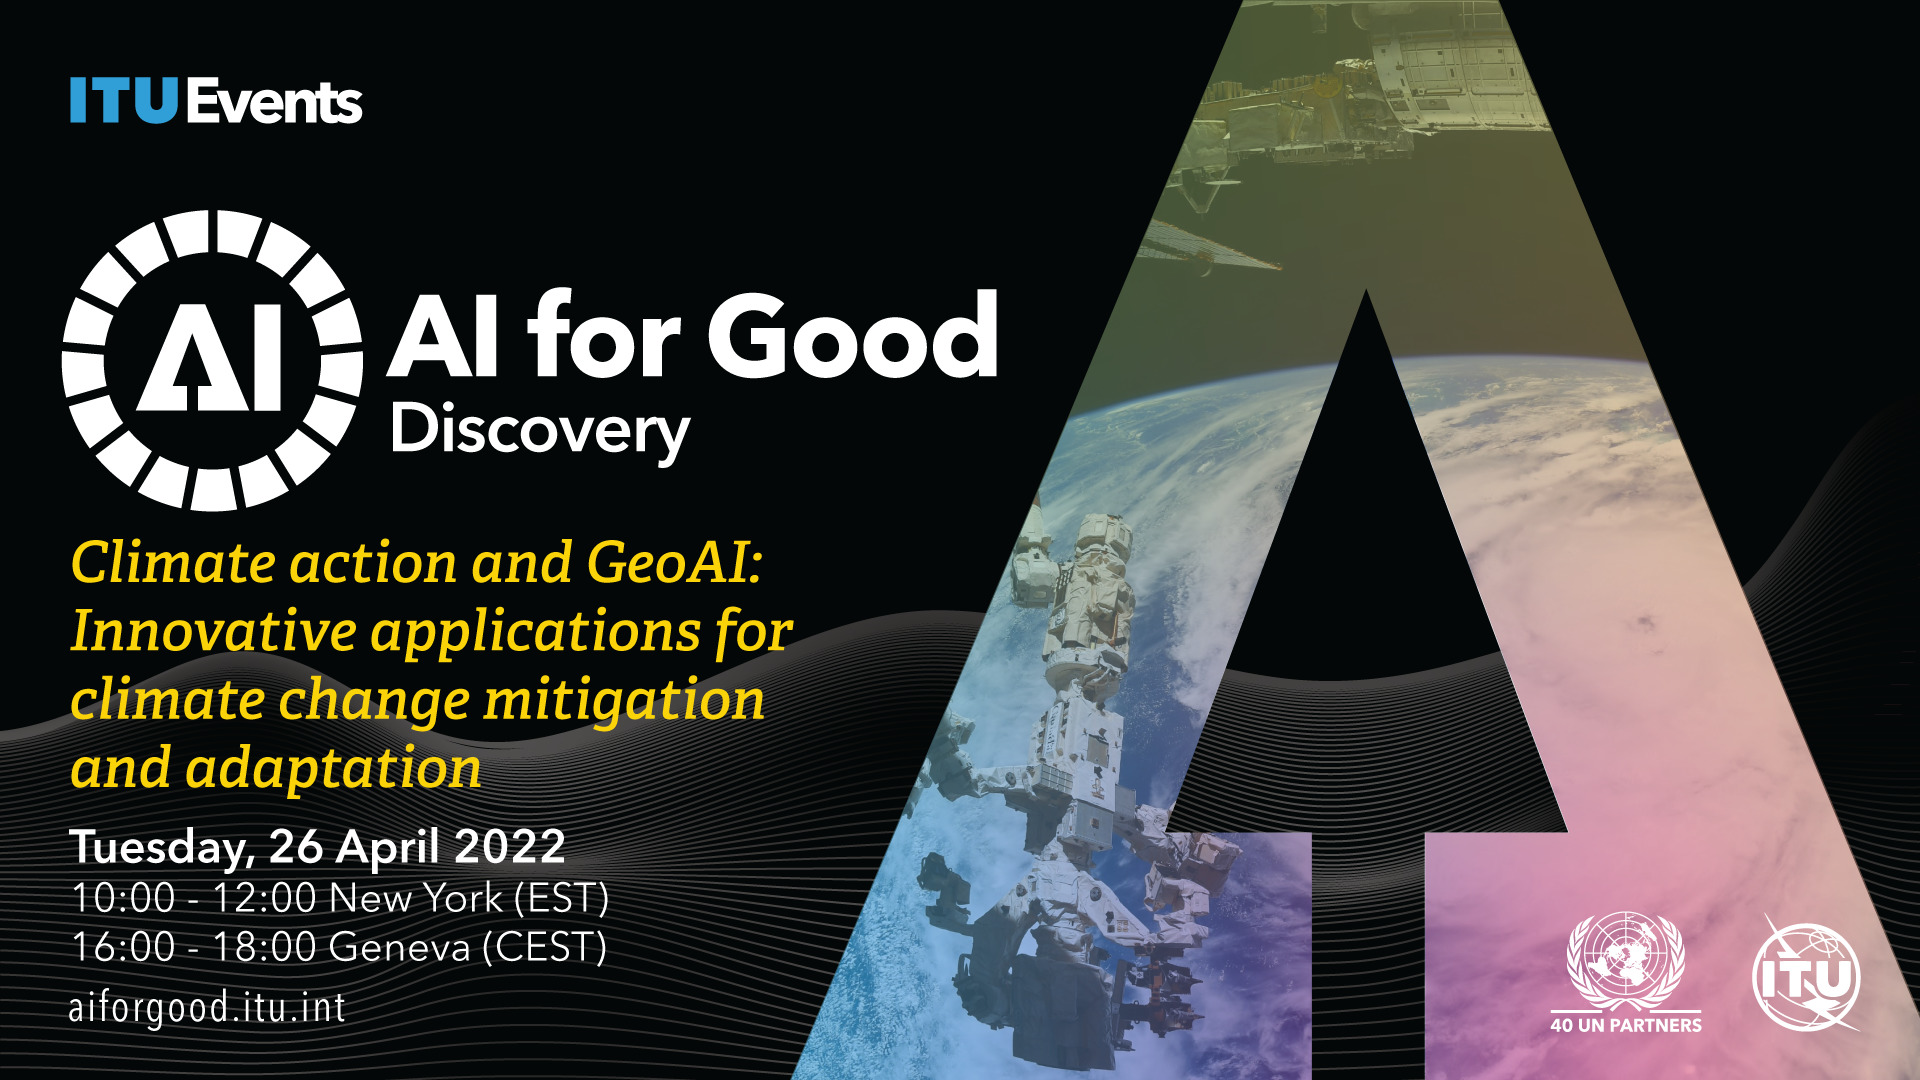 Climate action and GeoAI: Innovative applications for climate change mitigation and adaptation